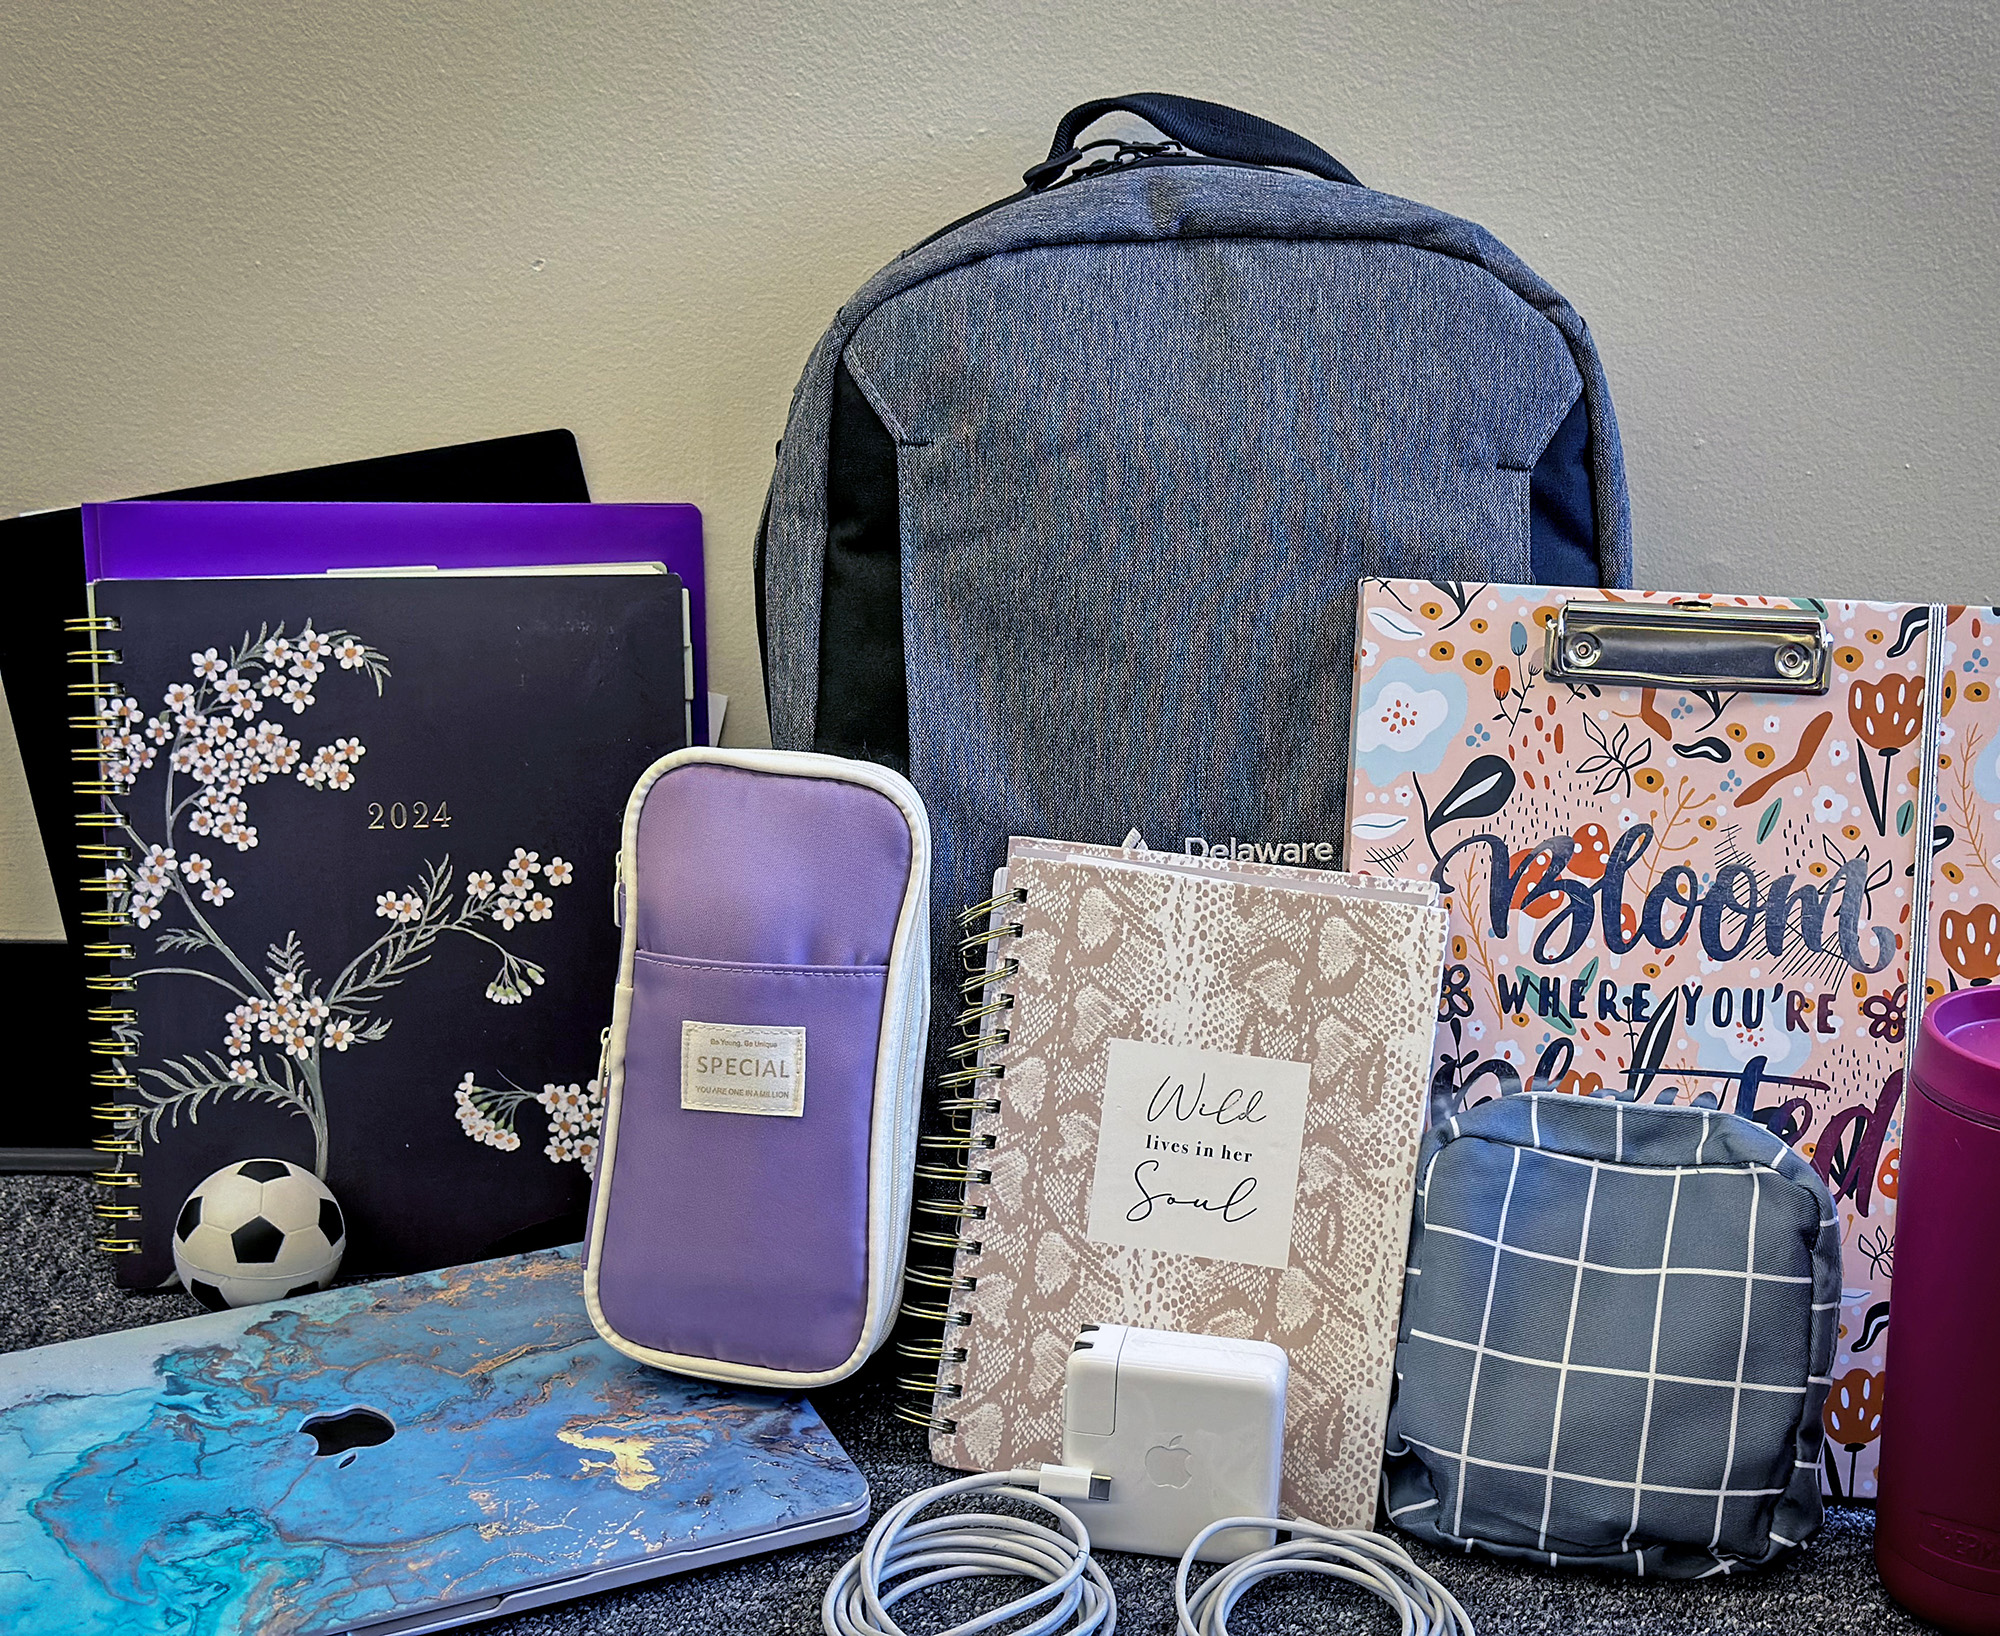 A laptop, a purple pouch, a planner, chargers, a gray backpack and more school supplies grouped together.